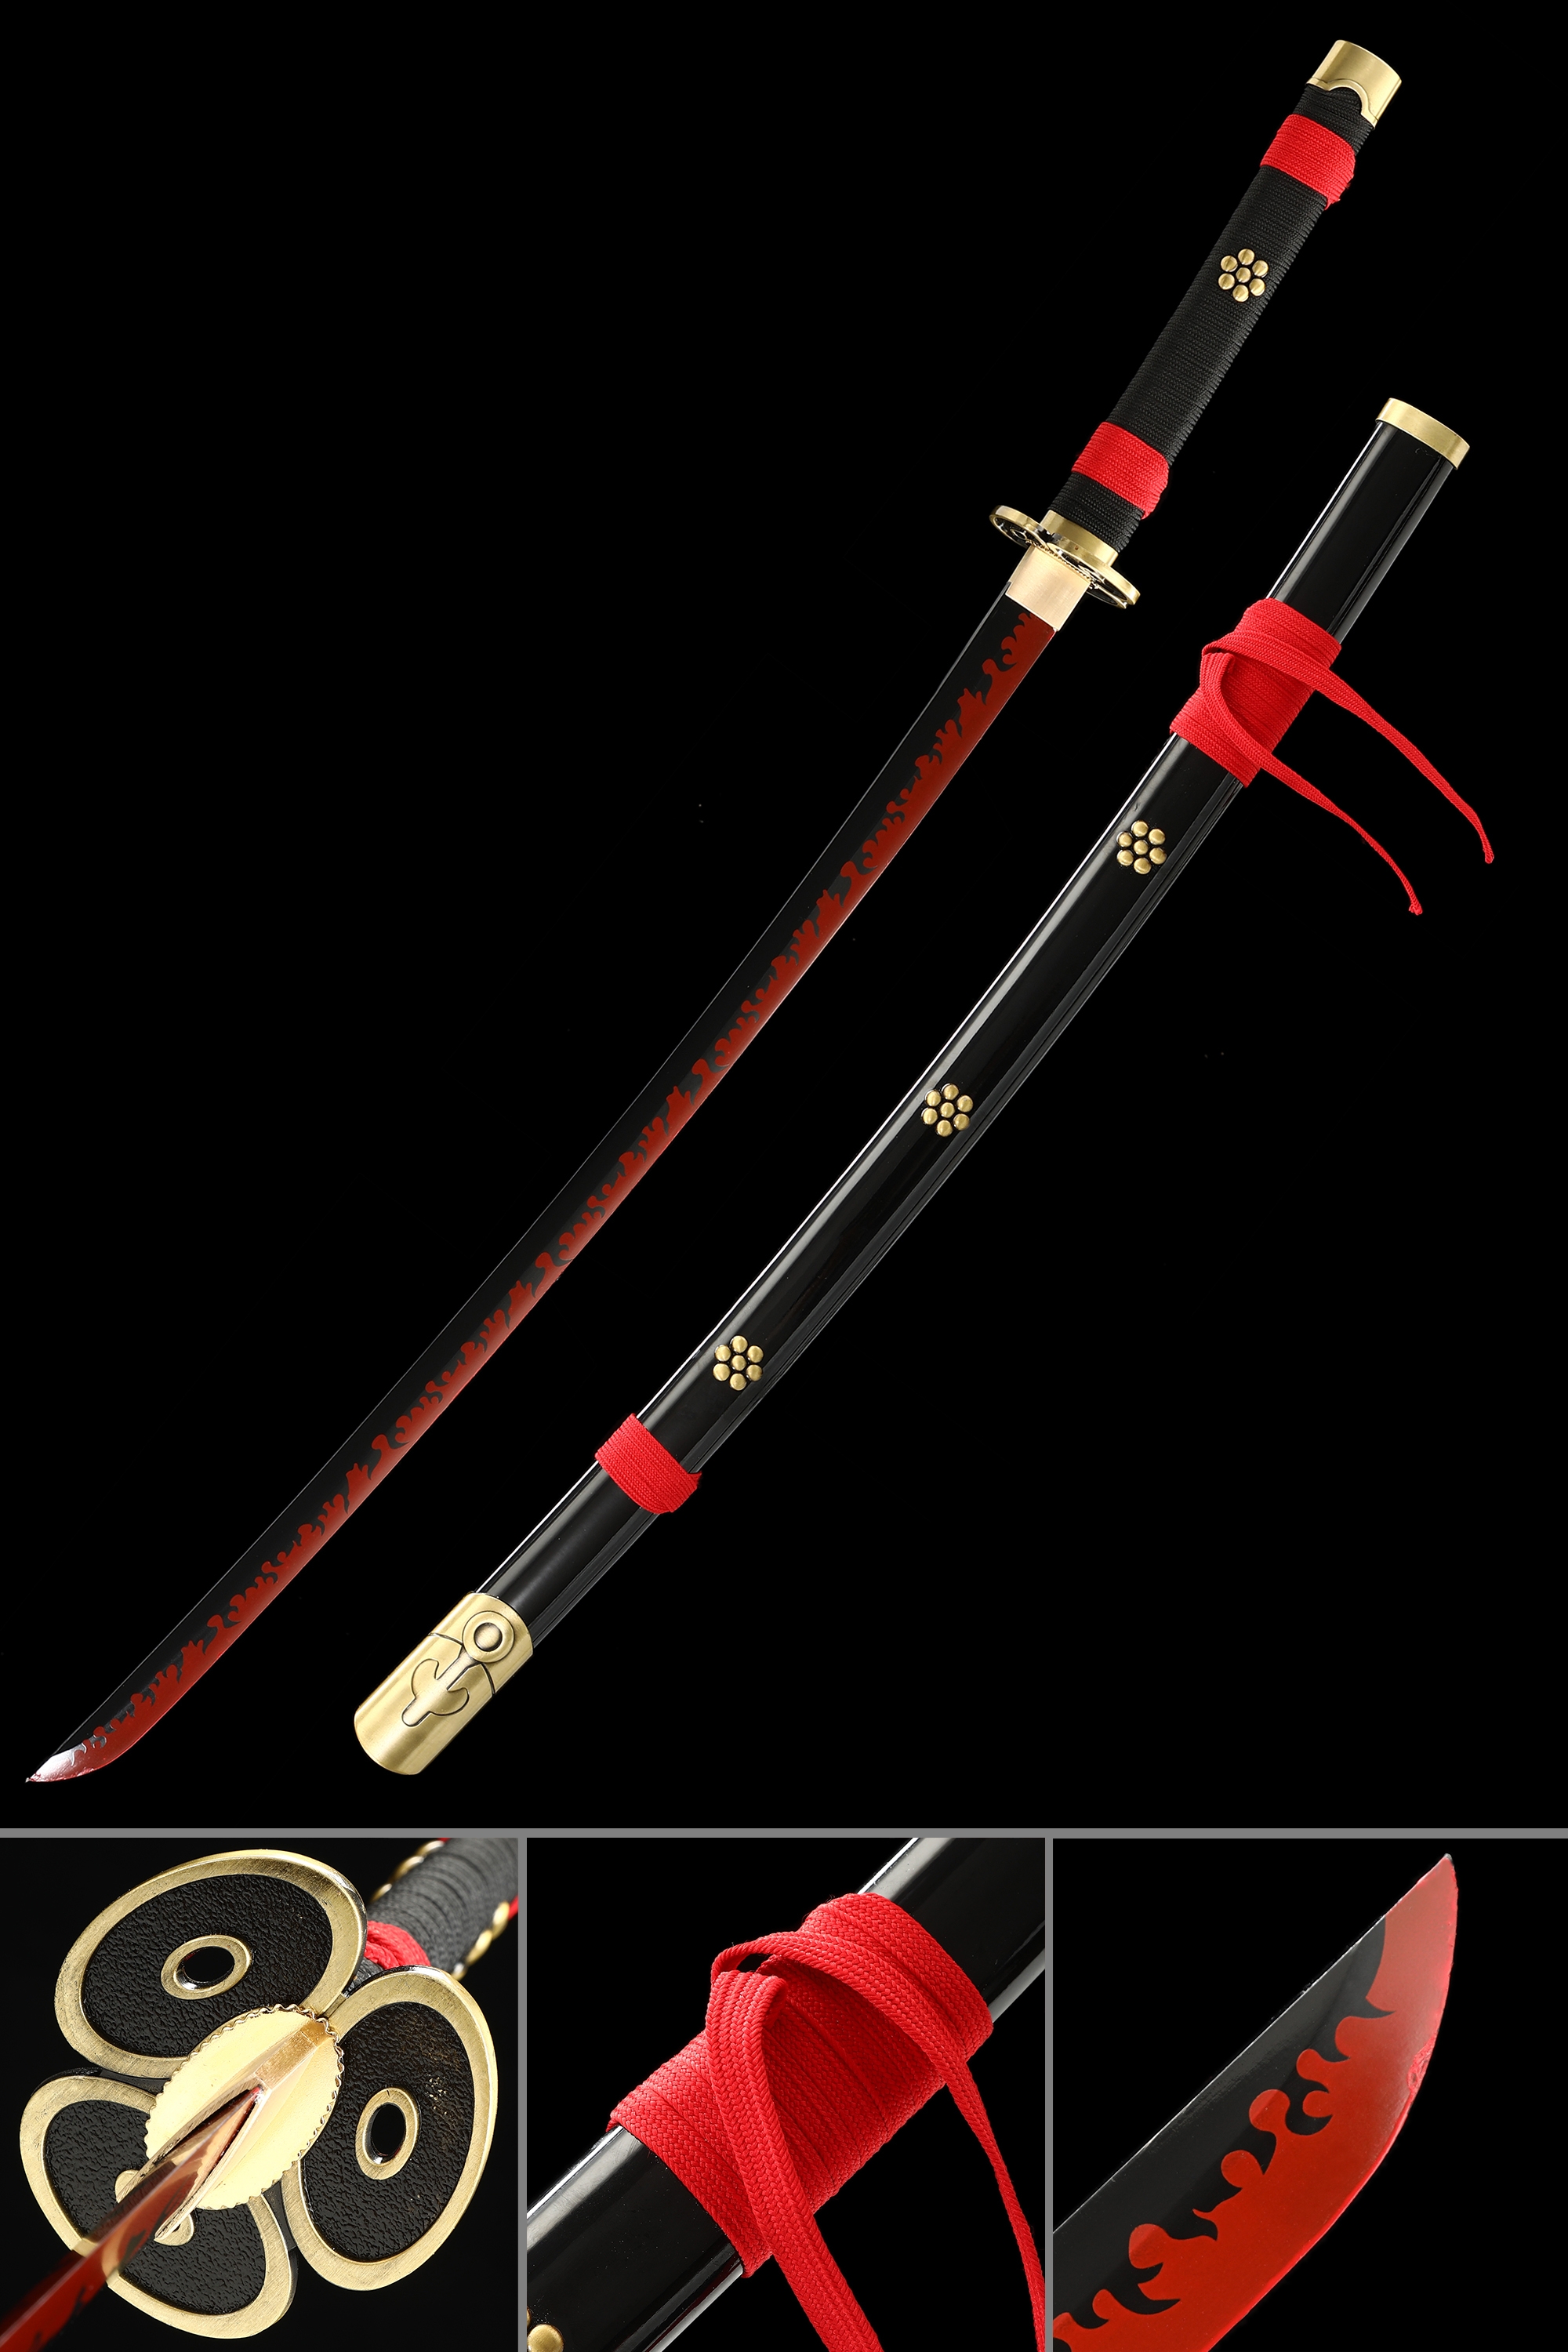 Handcrafted Japanese Samurai Sword 1060 Carbon Steel With Red And Black Blade